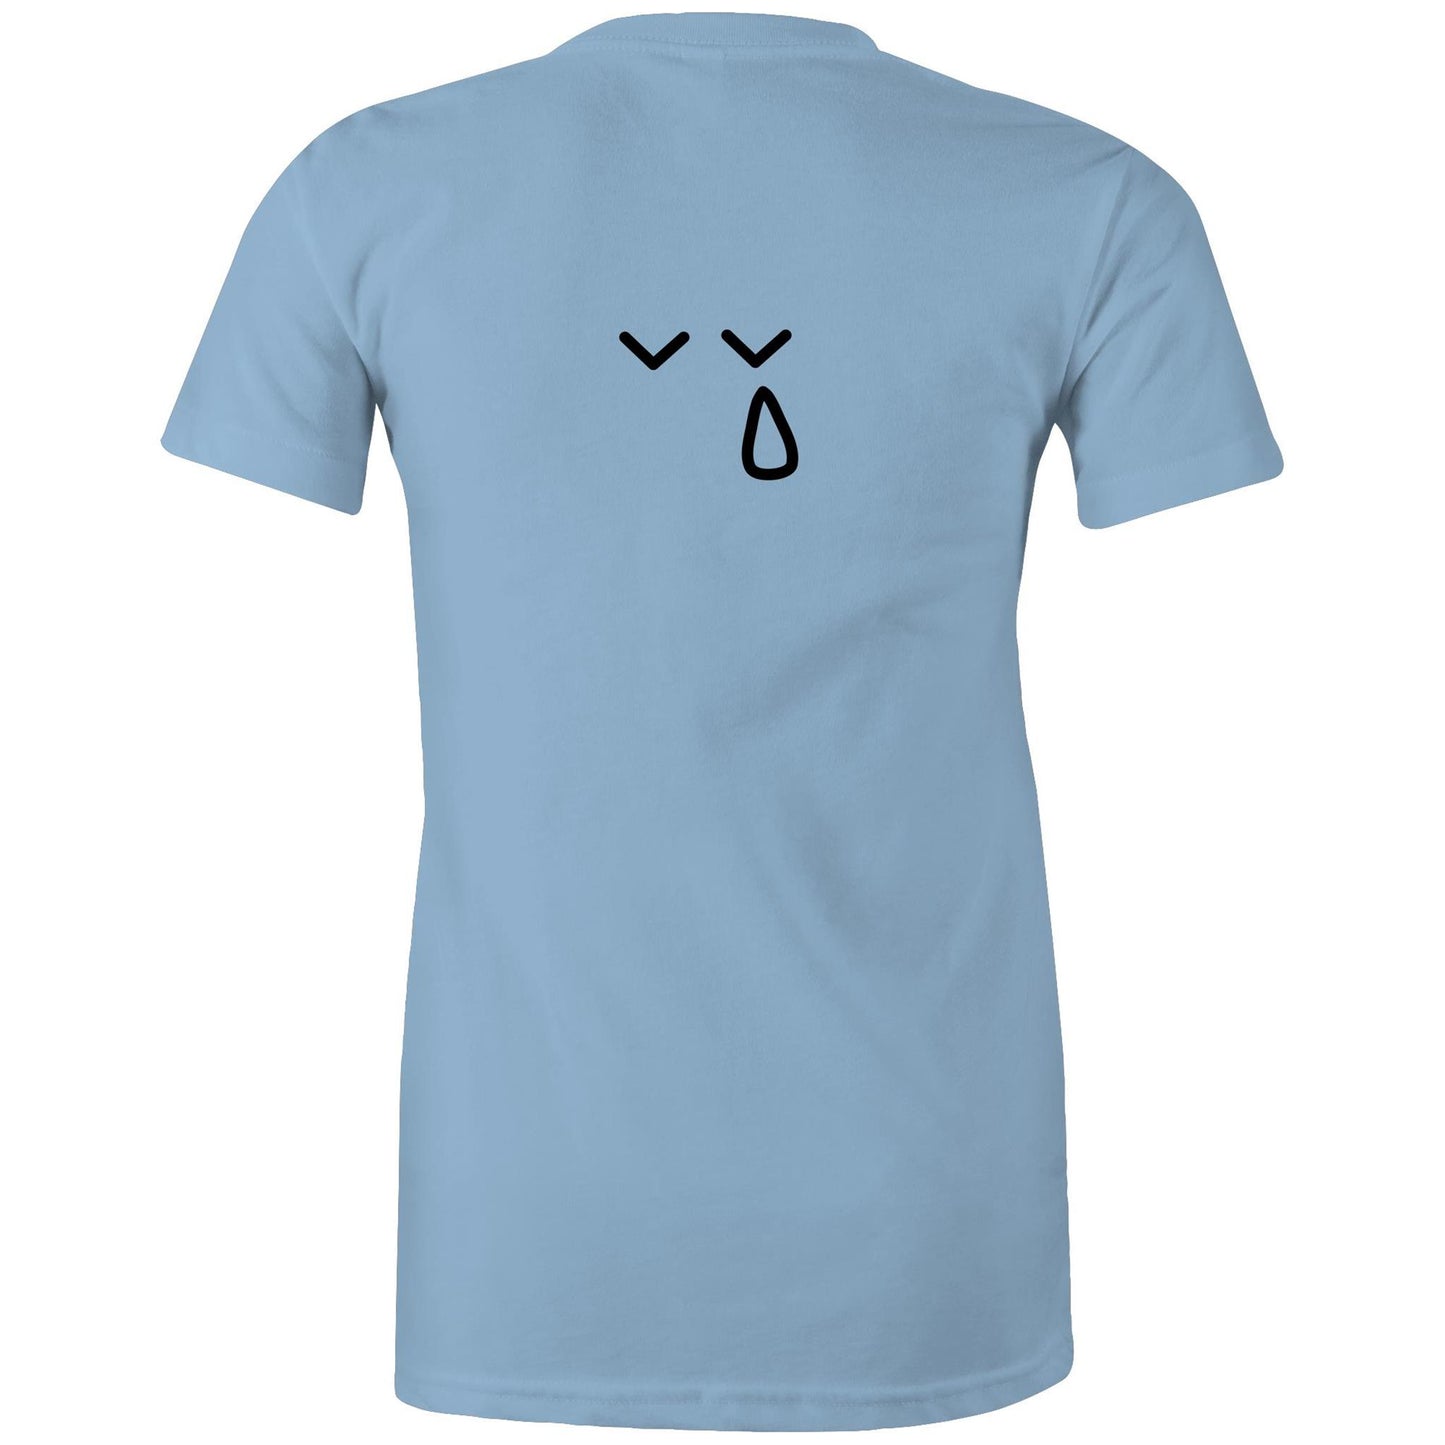 Current Mood 'CRYING' Women's Tee